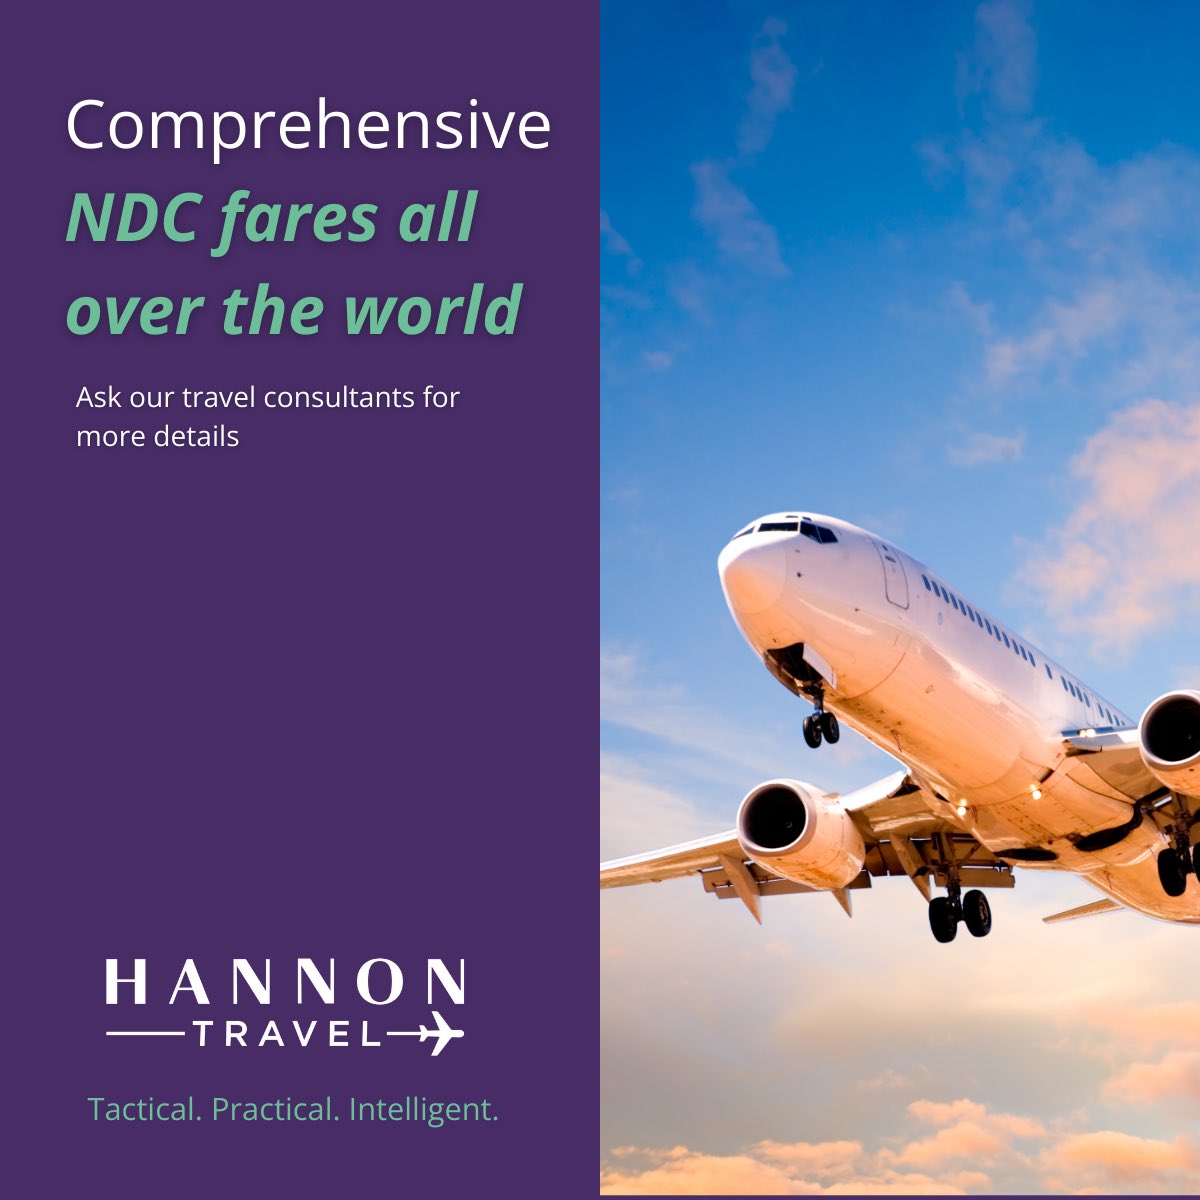 🛫 We offer comprehensive NDC fares all over the globe. Book via our Online Booking Tool or direct with our expert travel consultants, the choice is yours! Keen to hear more? Reach out to the team at info@hannontravel.com or call us direct at + 353 46 907 5852.